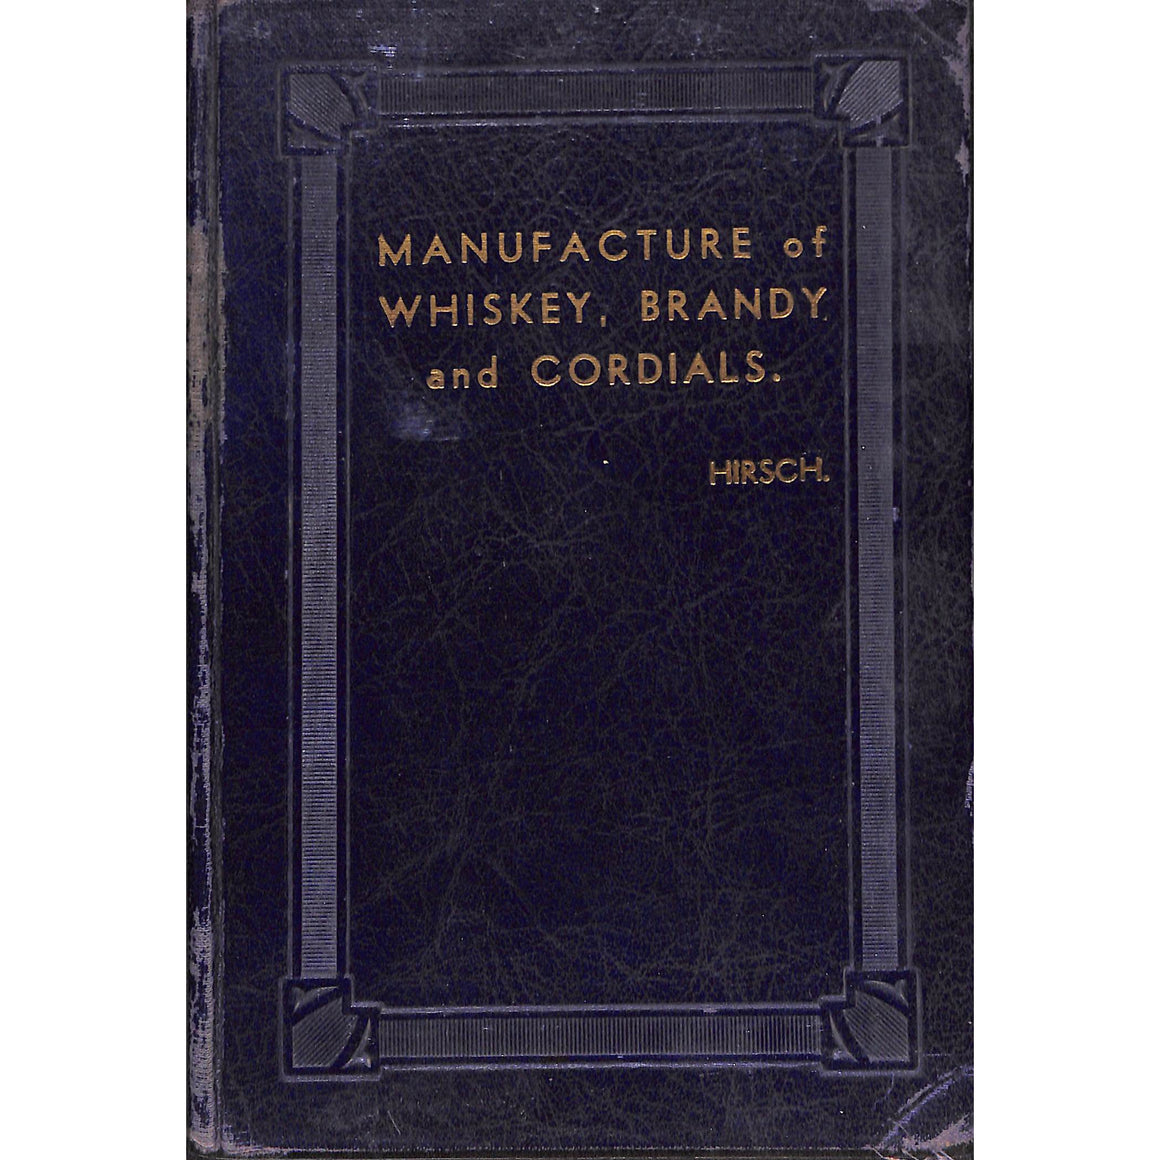 Manufacture of Whiskey, Brandy, and Cordials